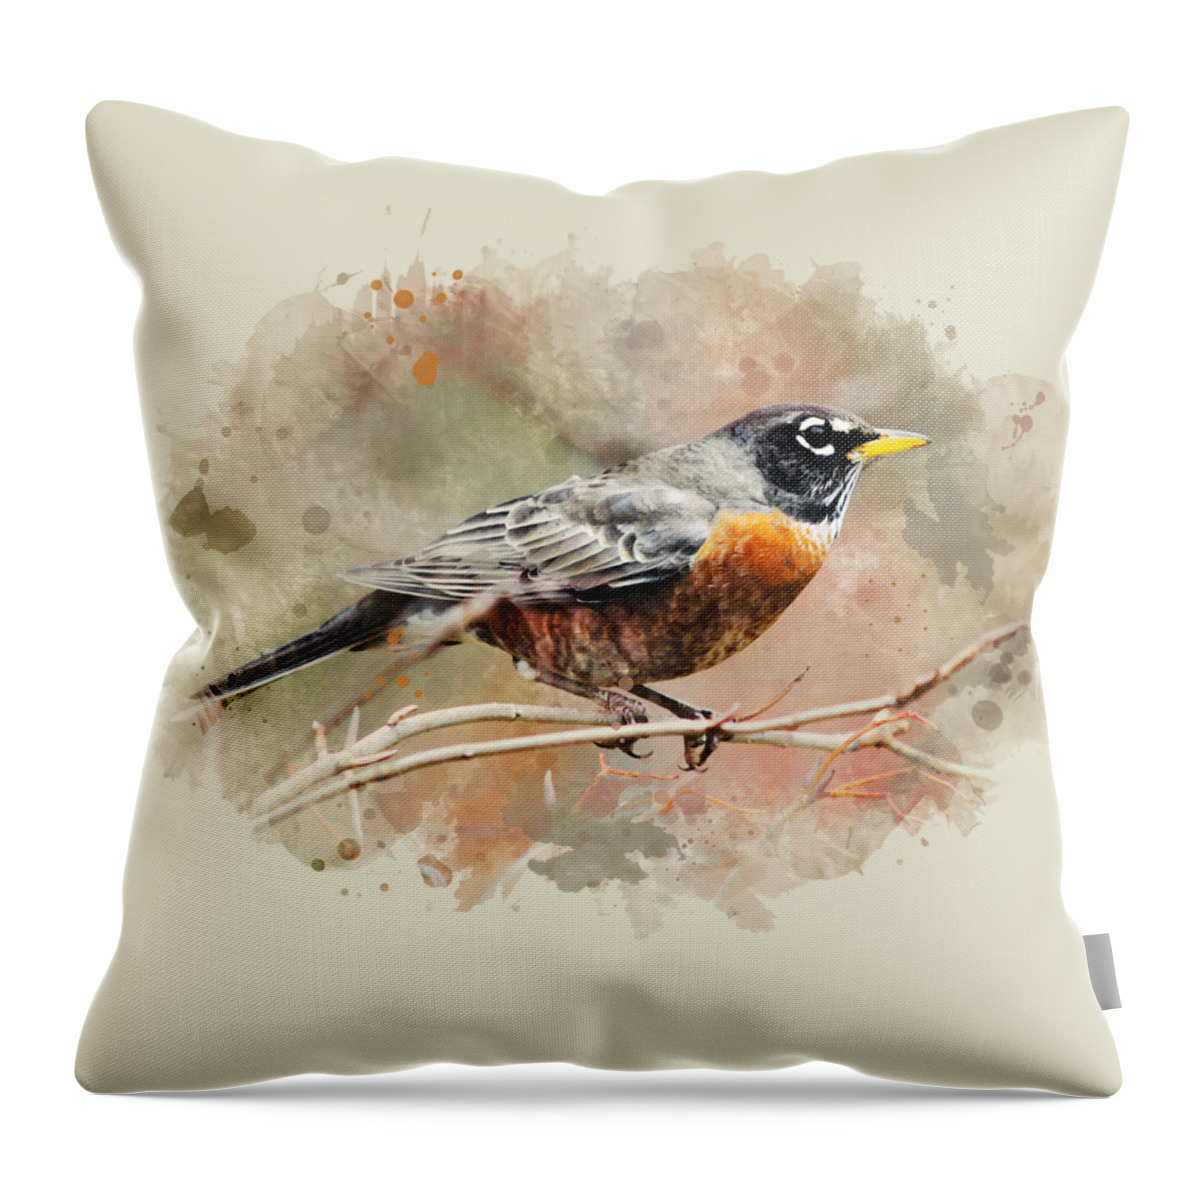 American Robin Throw Pillow featuring the mixed media American Robin - Watercolor Art by Christina Rollo